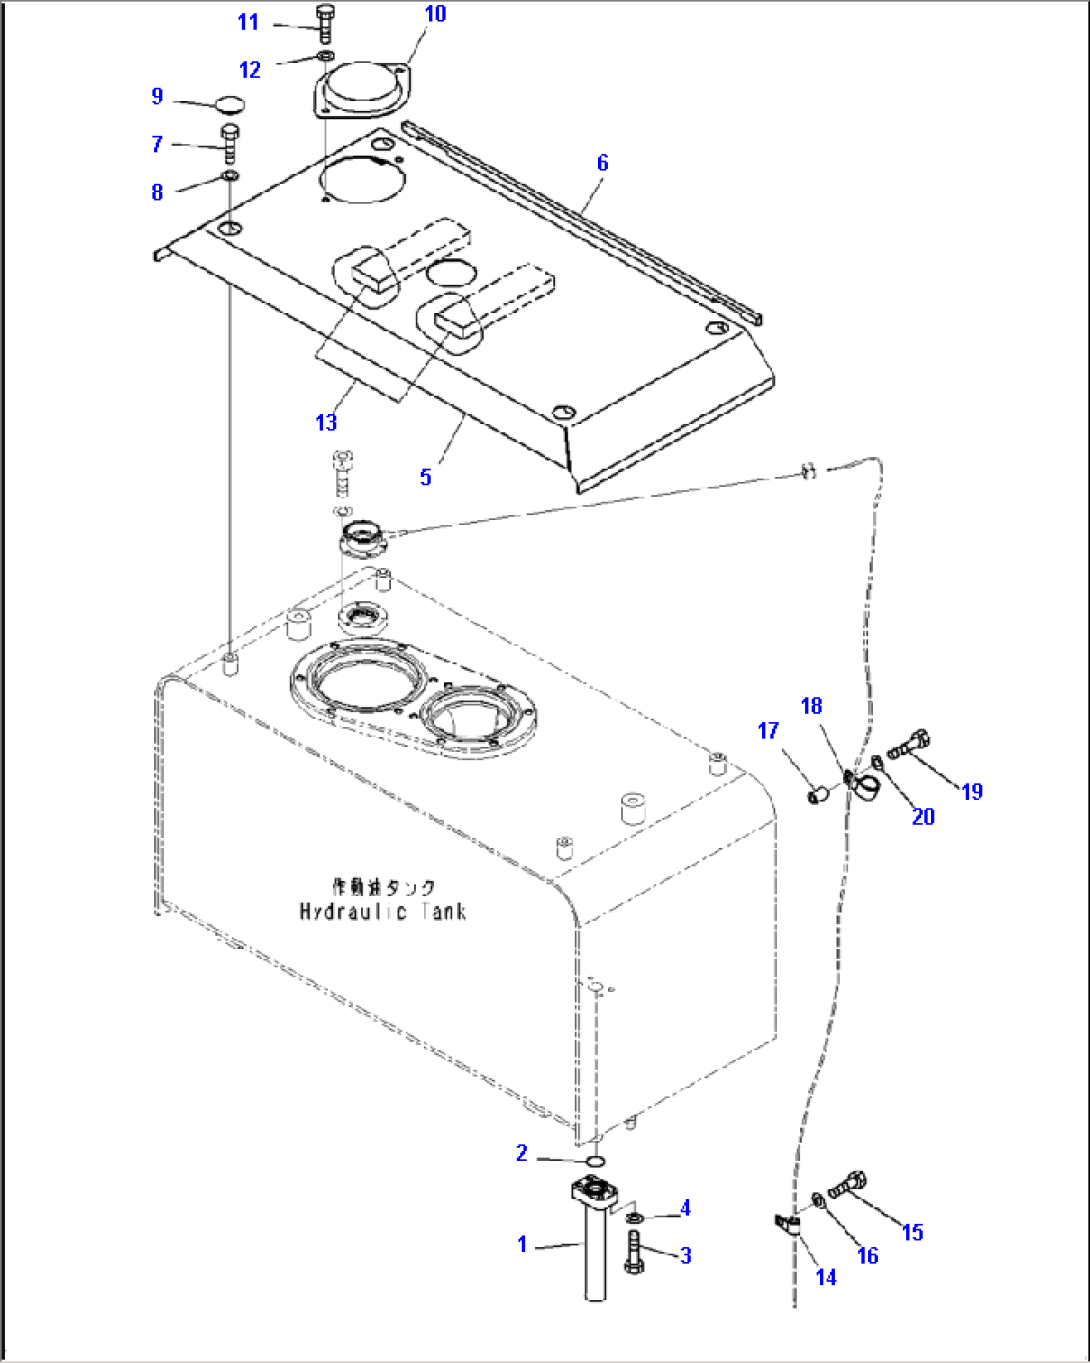 H0110-002004 HYDRAULIC TANK (WITH AUXILIARY STEERING) HYDRAULIC TANK COVER